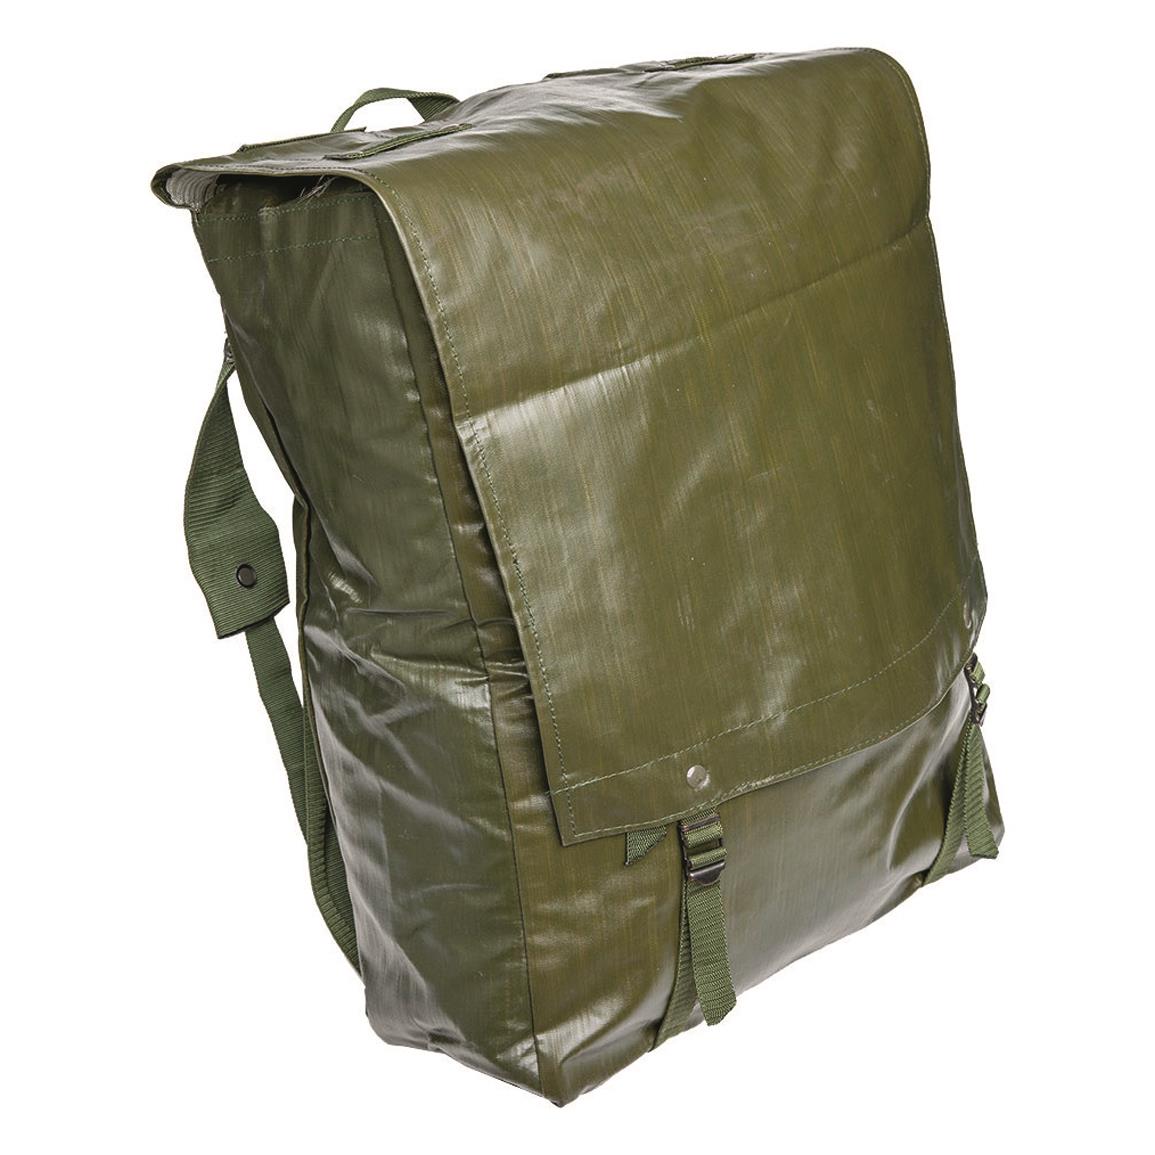 Czech Army M85 Olive Drab Military Messenger Shoulder Rubberised Bread Bag New